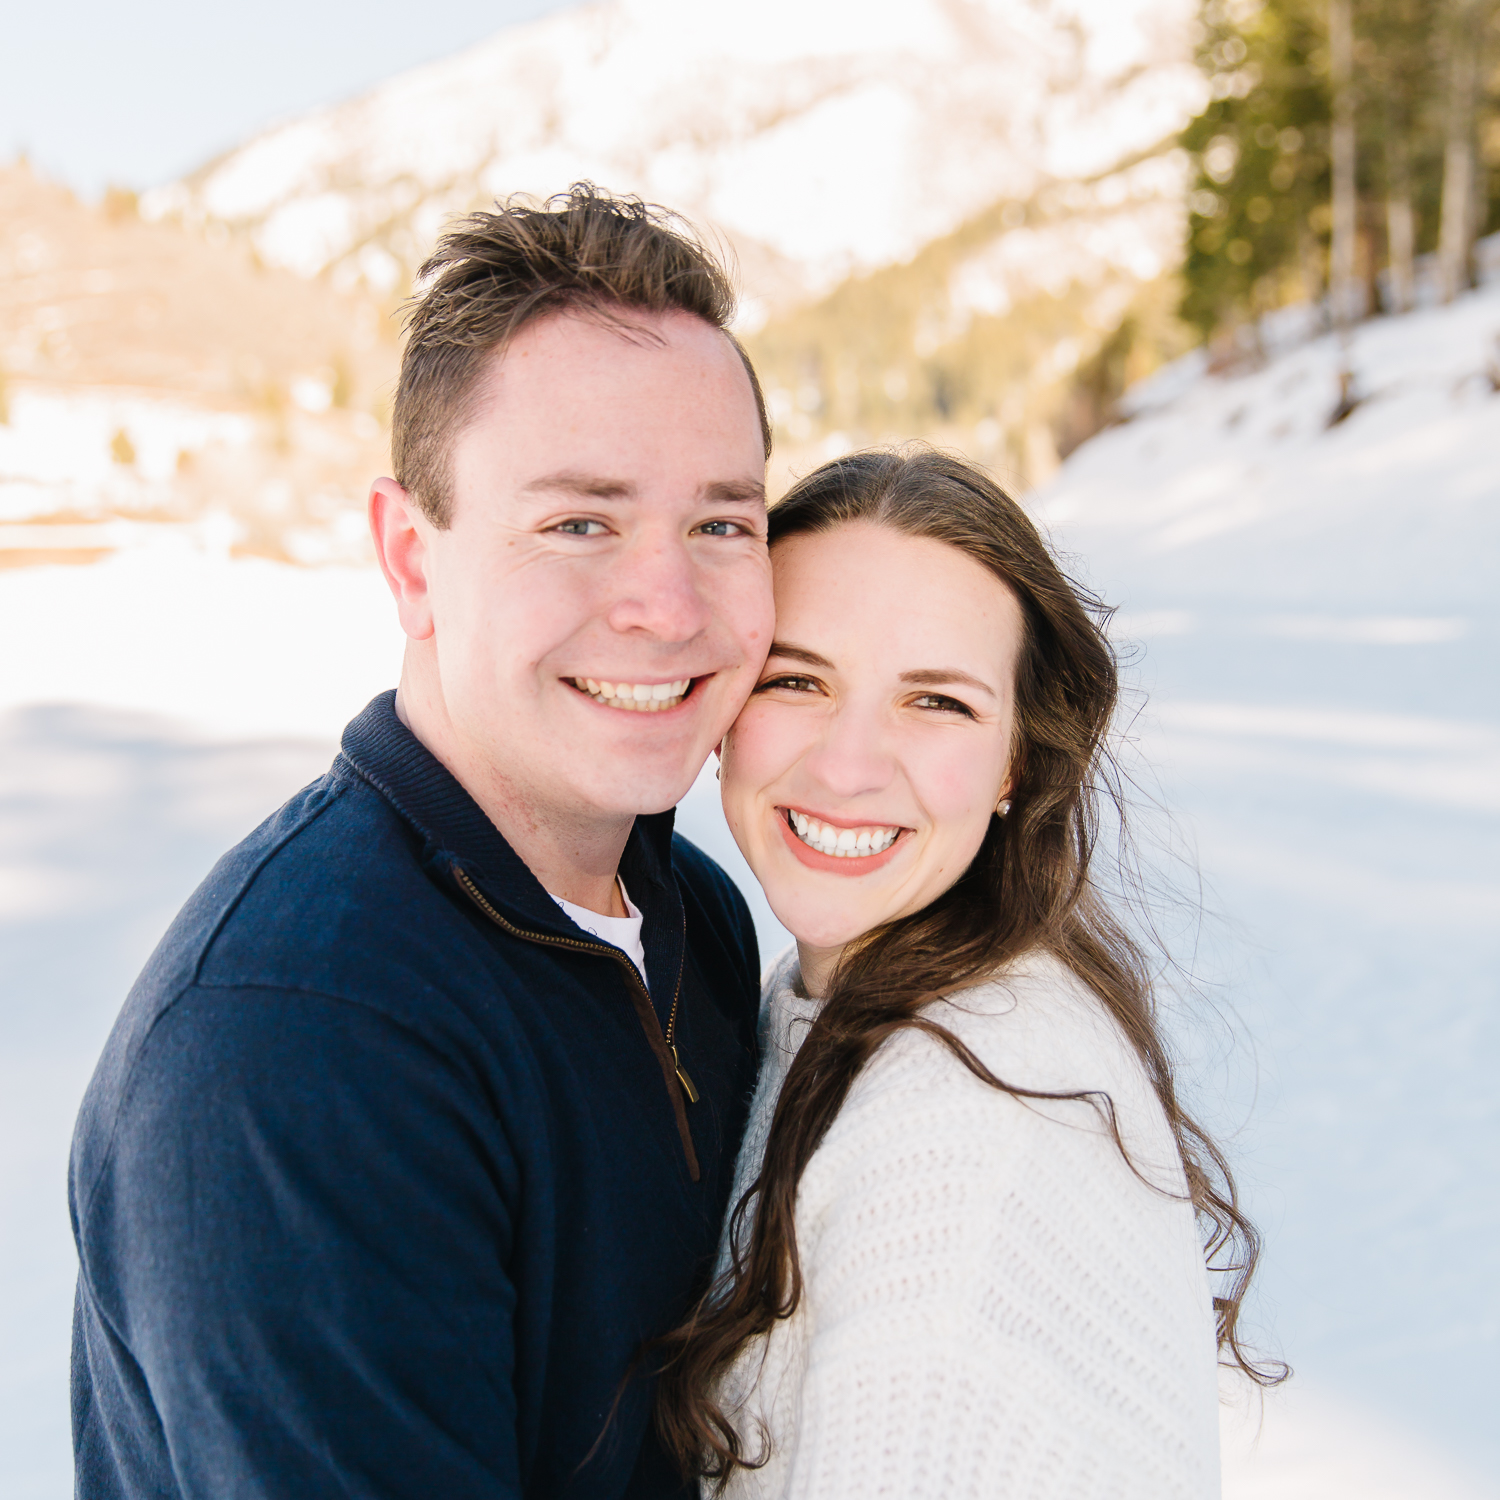 Tibble Fork Engagements | Utah Engagement photographer l Engagement inspiration l What to Wear | Best engagement pose ideas l Engagement Photos Utah l Candid engagements | Leianne Phillips Photography